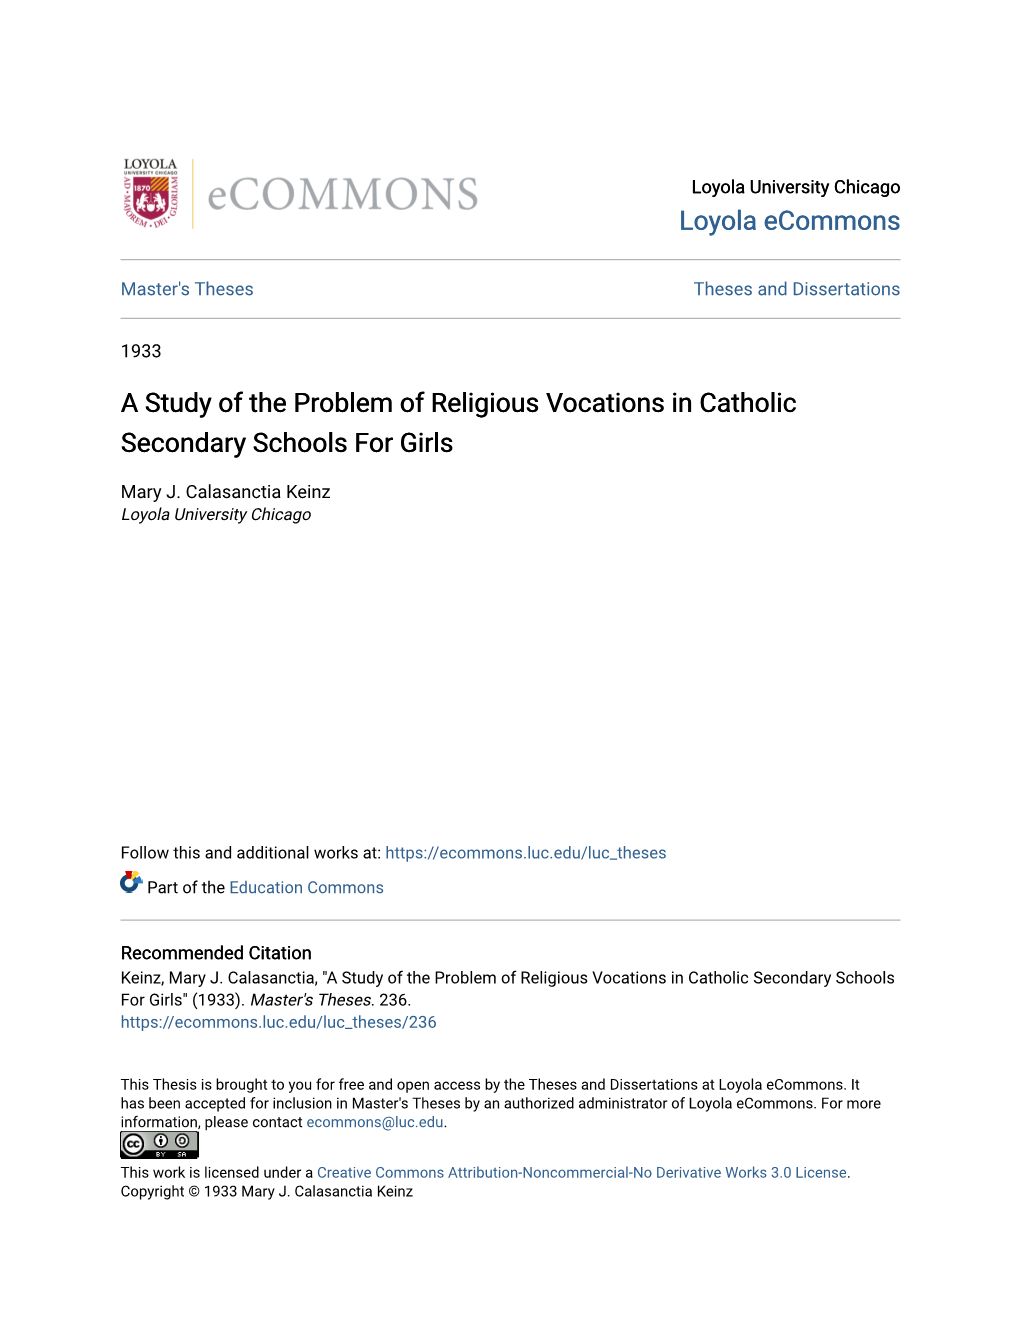 A Study of the Problem of Religious Vocations in Catholic Secondary Schools for Girls